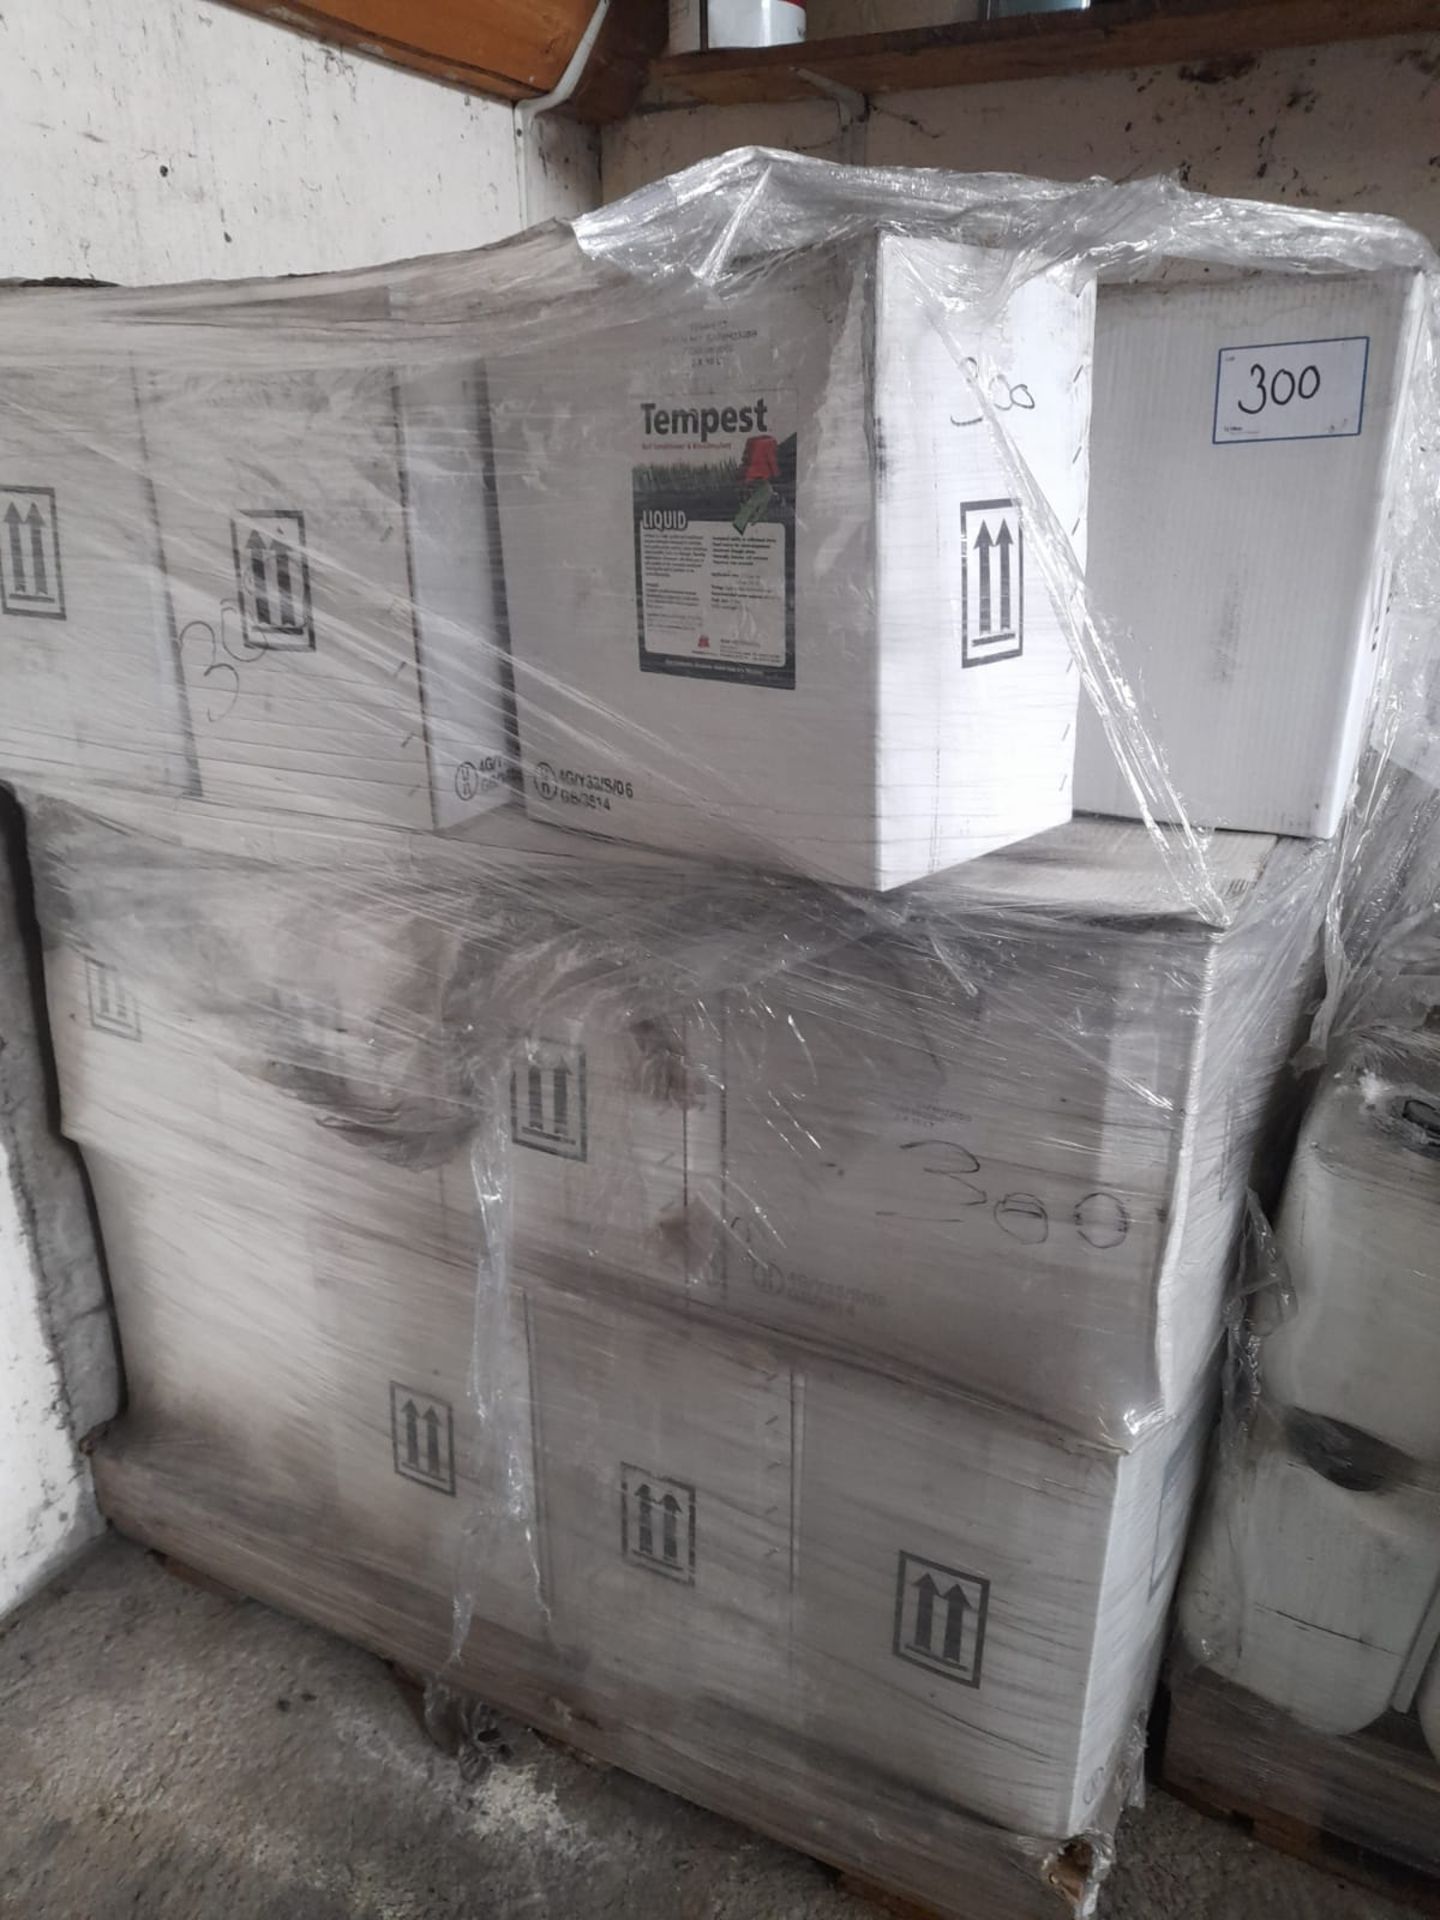 3: Pallets With Approximately 94 Boxes Of Tempest Soil Conditioner And Bio-Stimulant